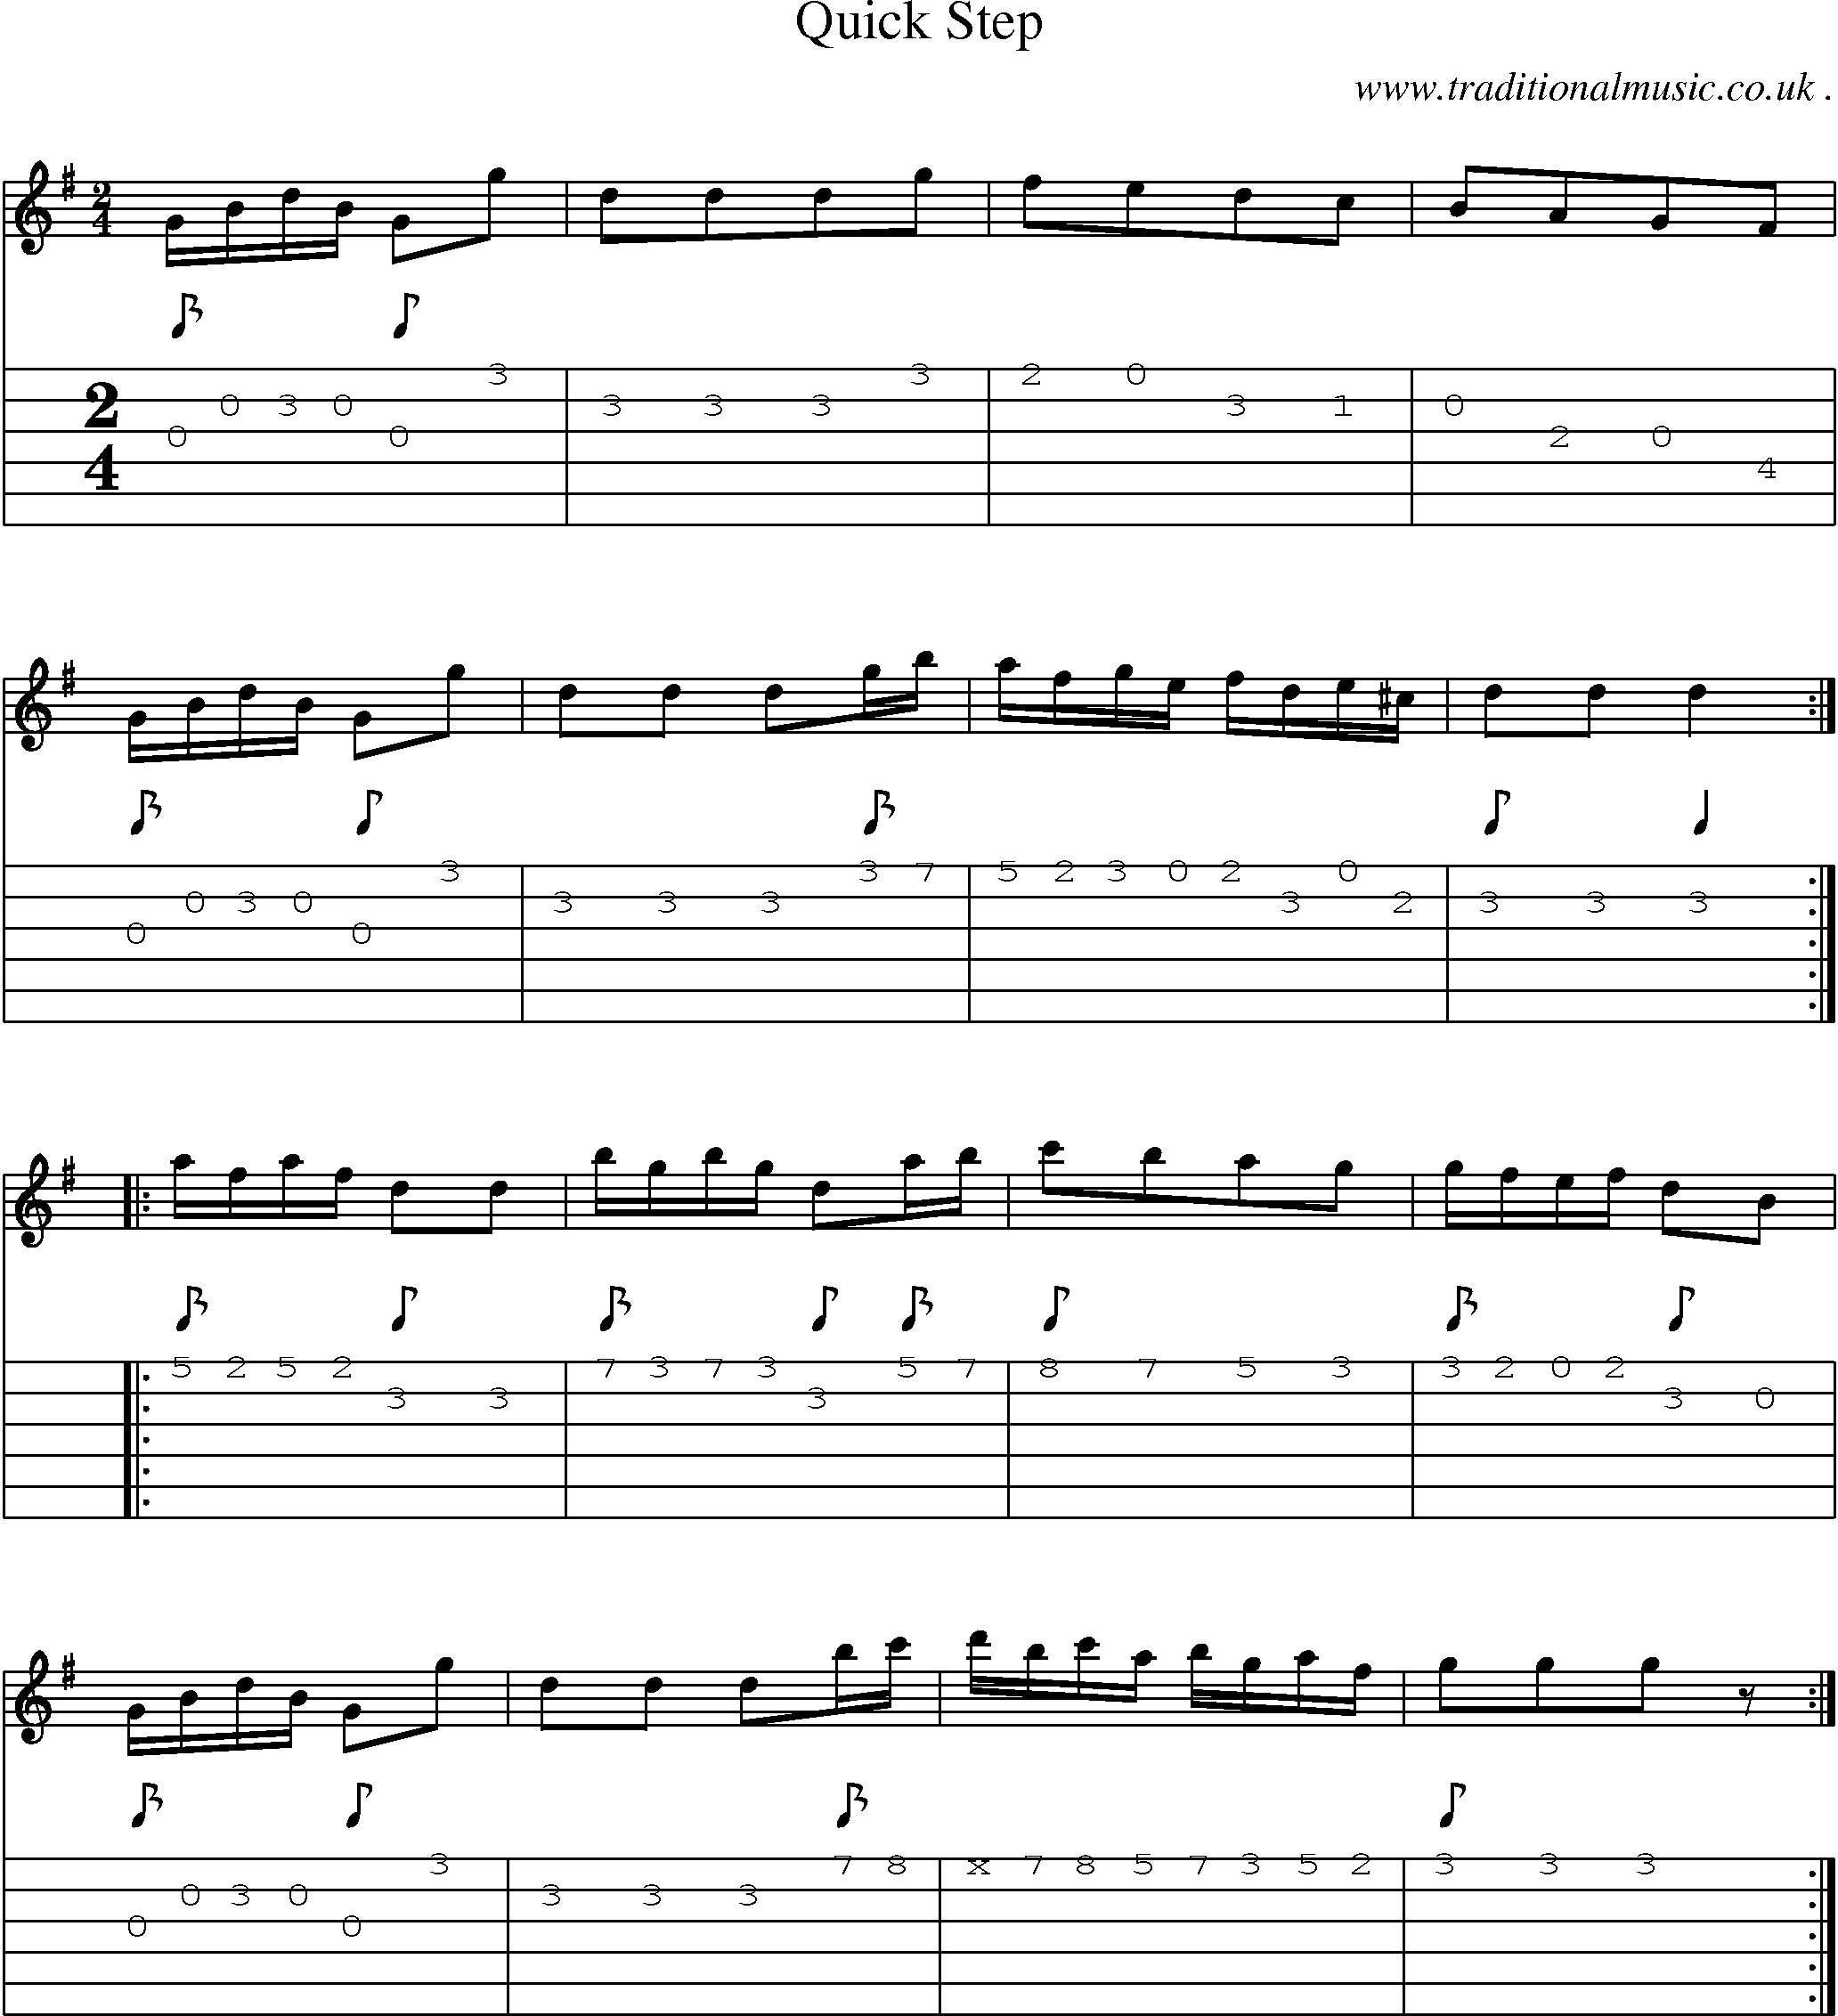 Sheet-Music and Guitar Tabs for Quick Step